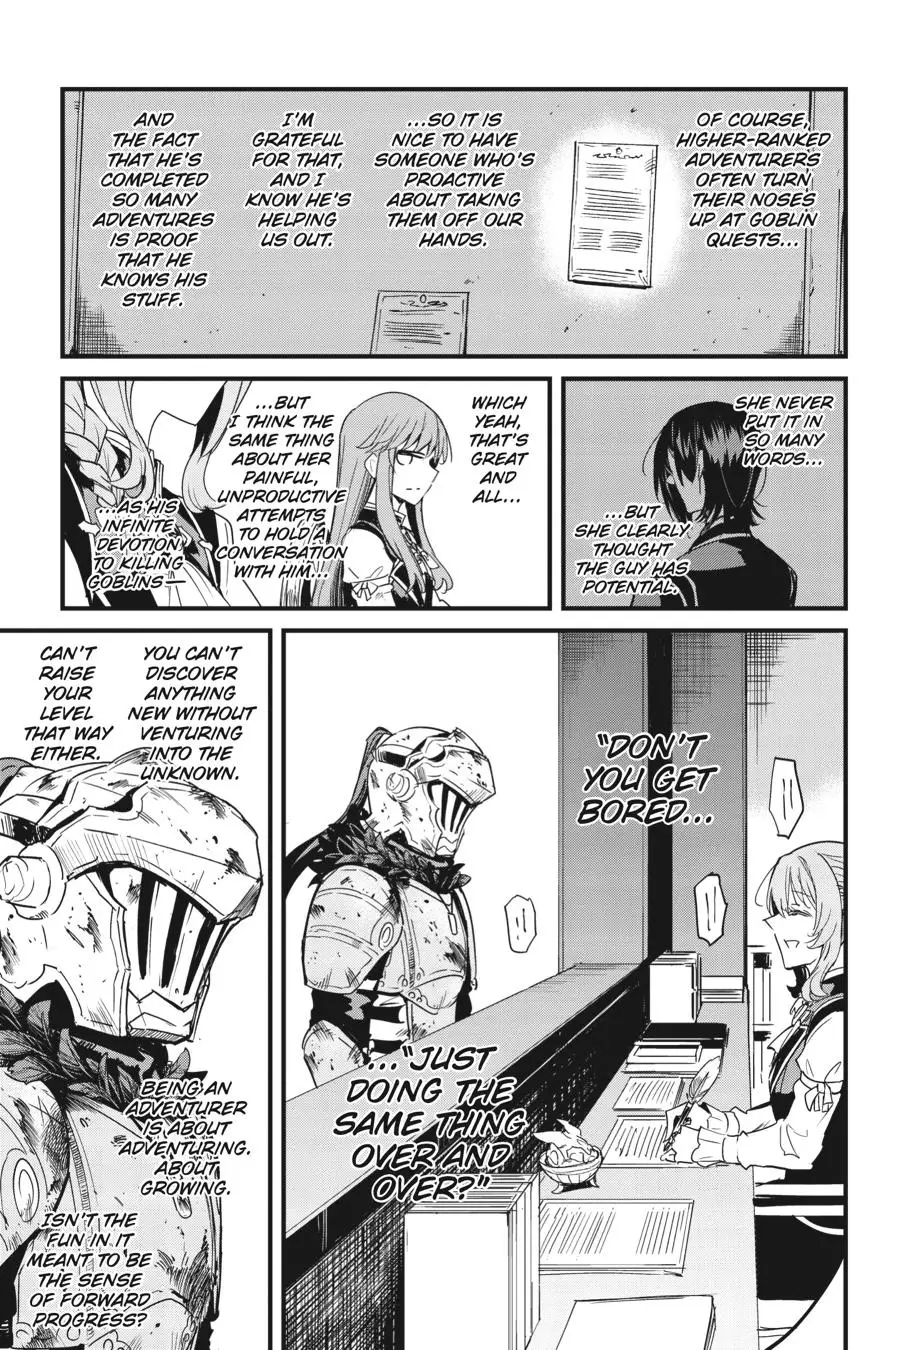 Goblin Slayer: Side Story Year One - 82 page 15-54f37f5f